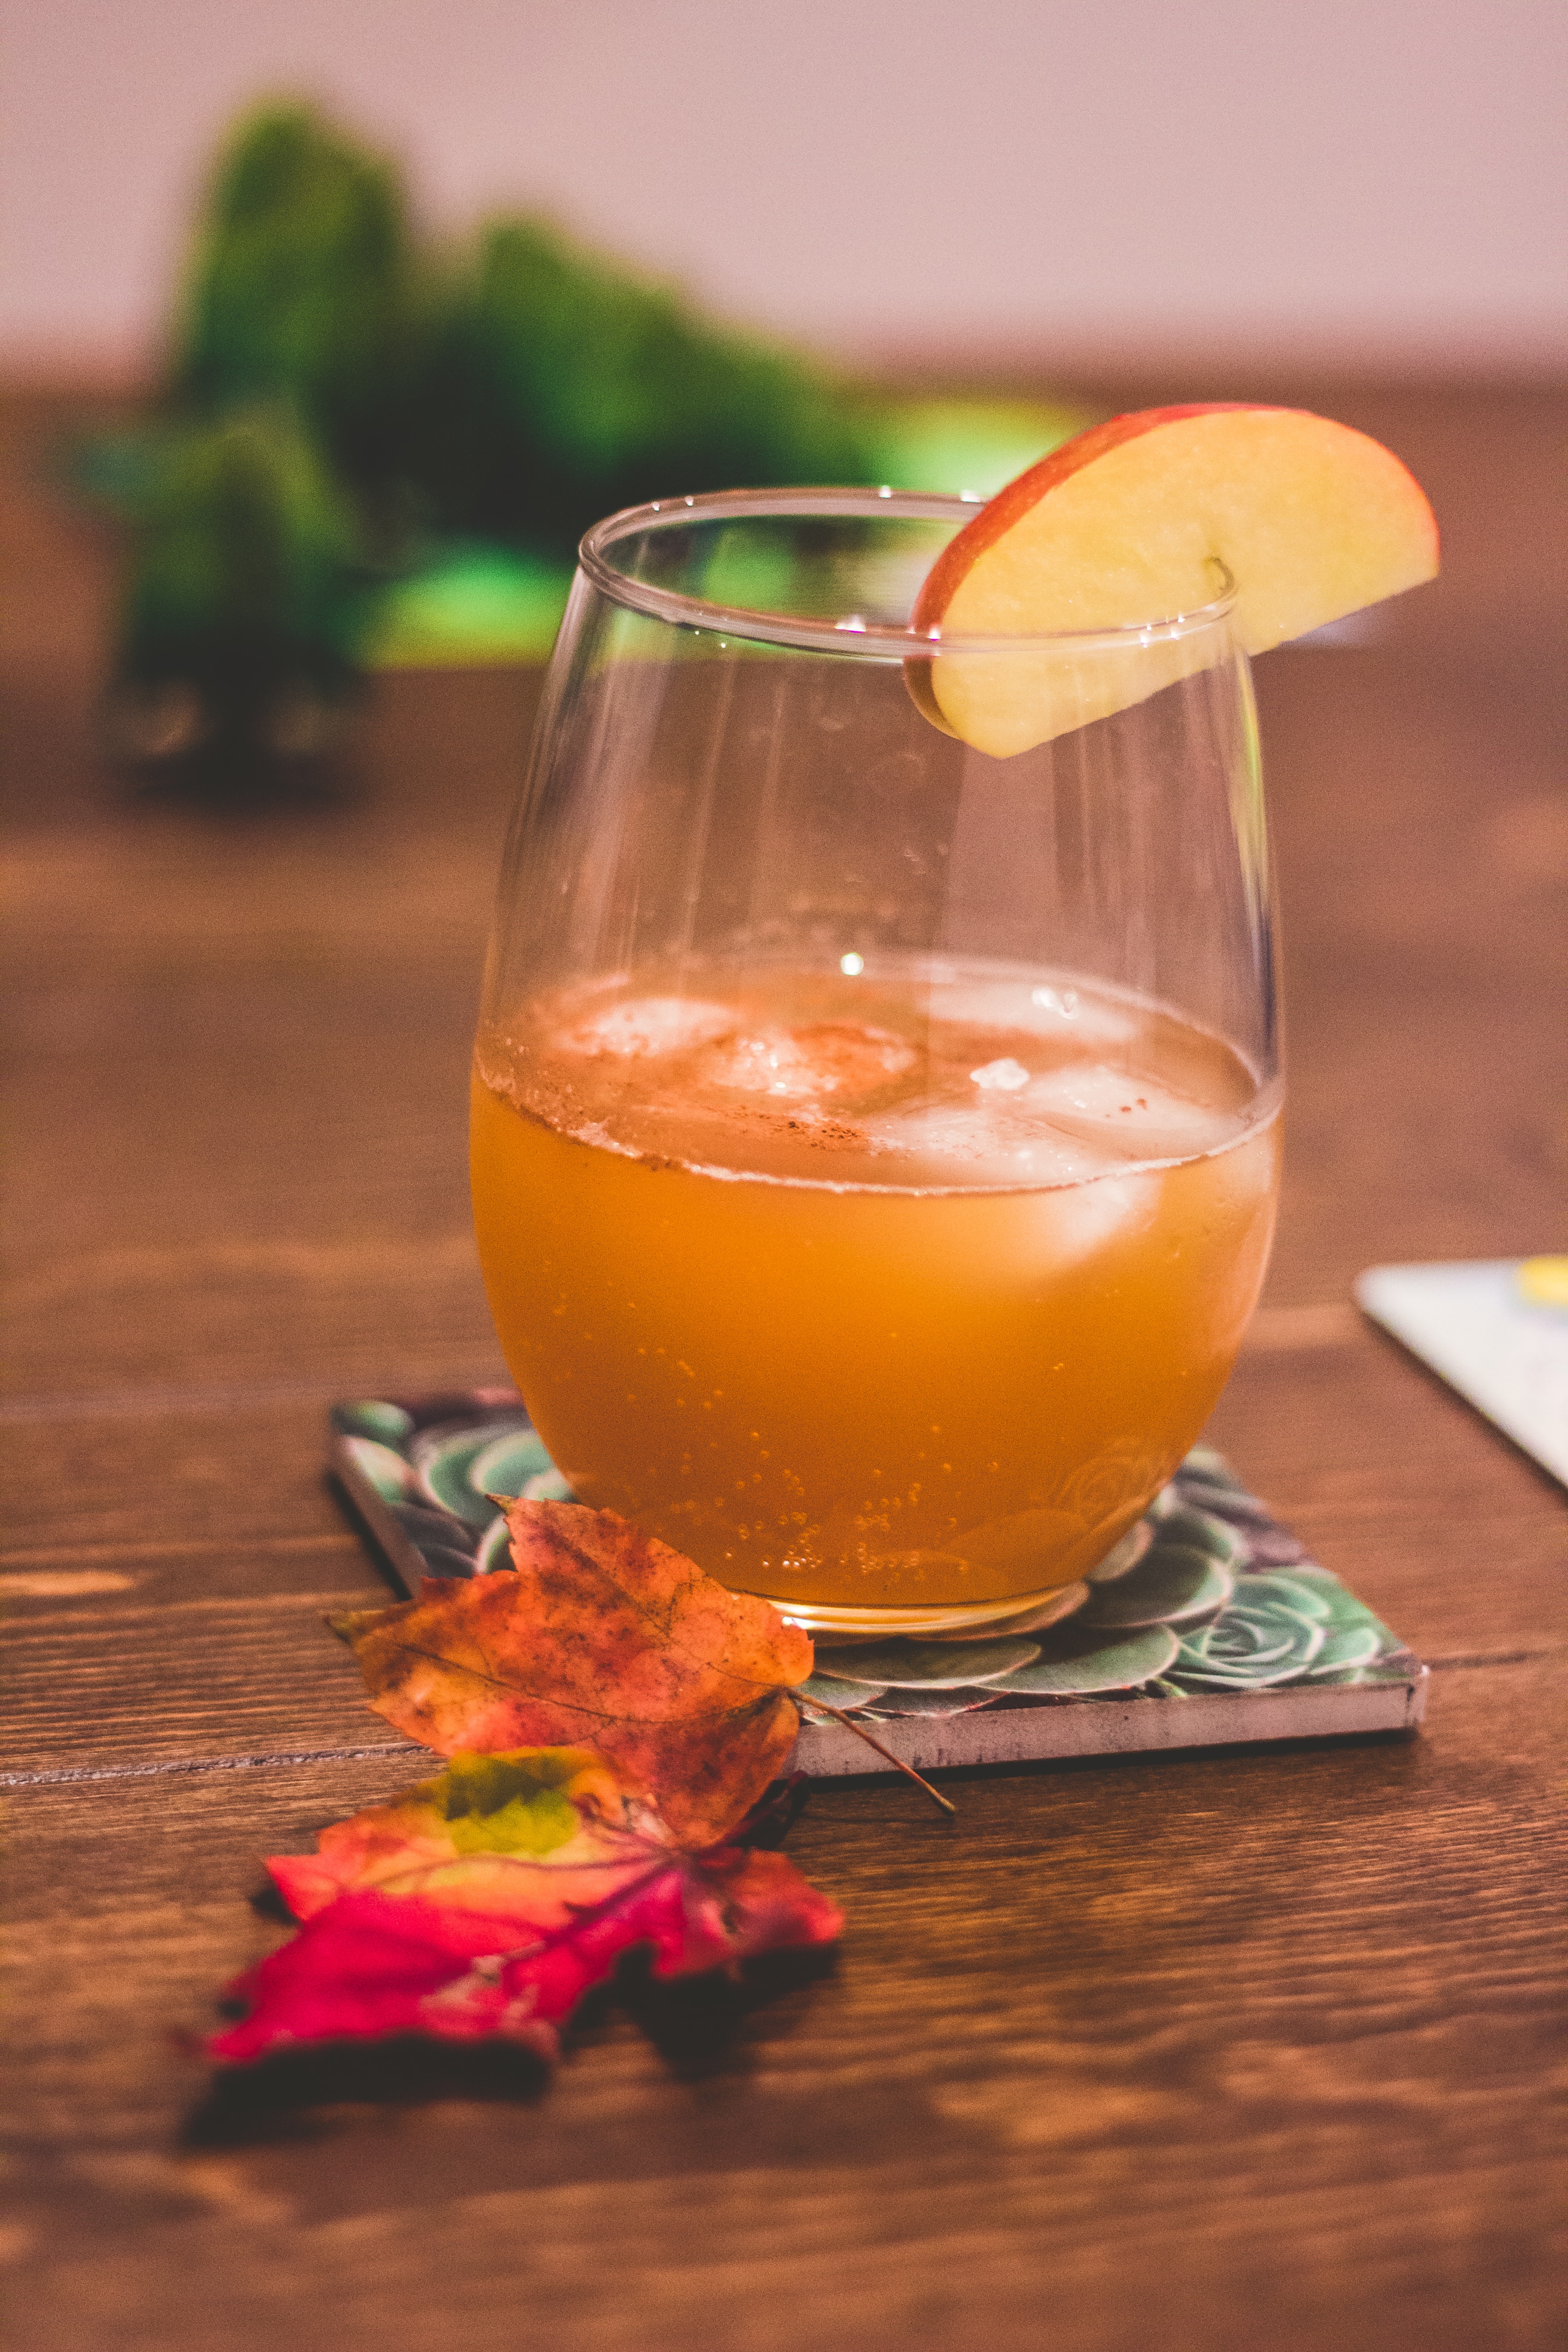 Fun Easy Fall Cocktails to Make at Home